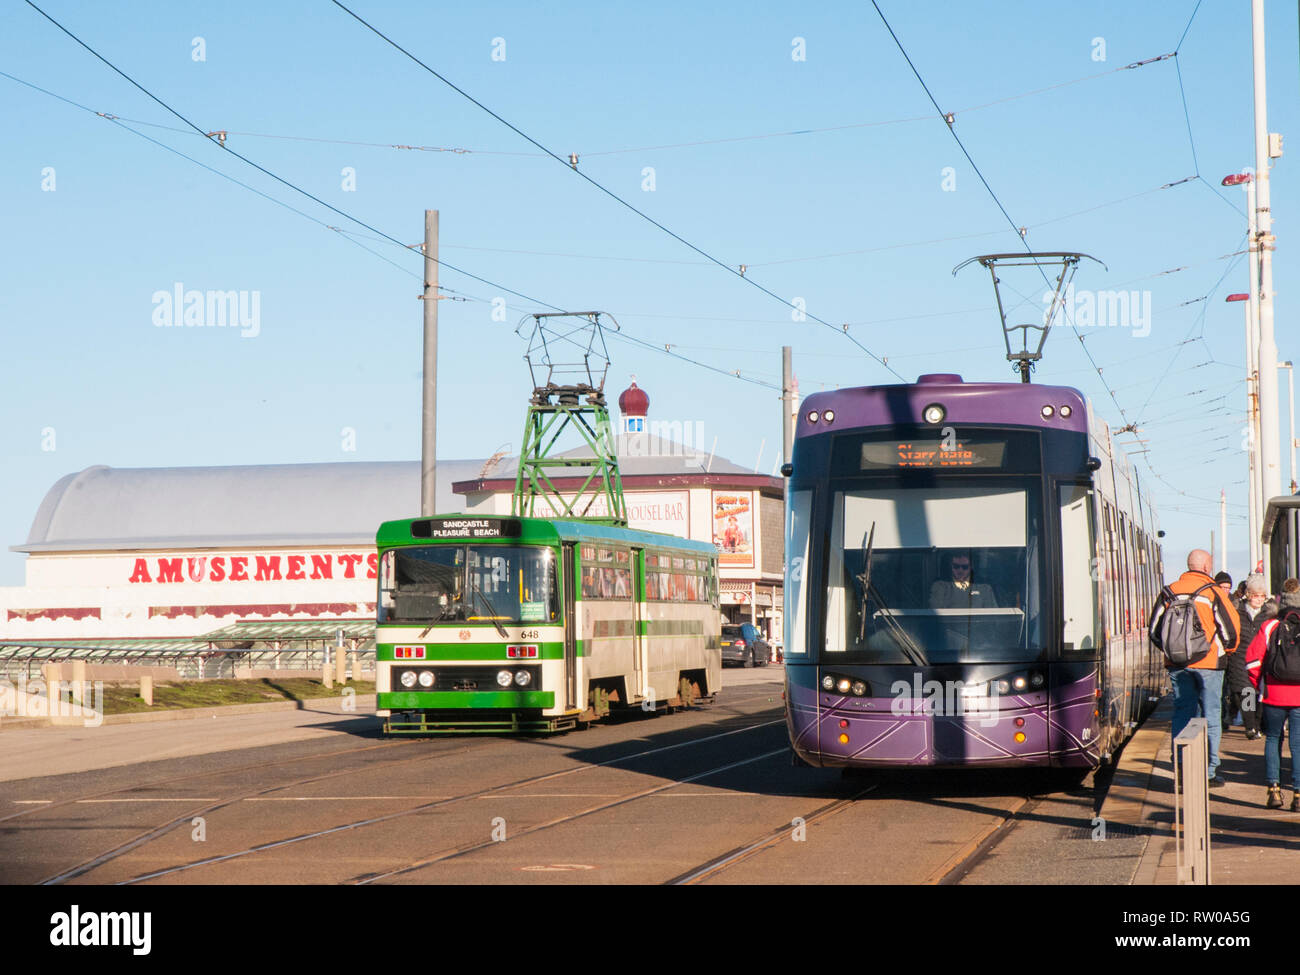 Heritage Centenary Tram 648 alongside BombardierFlexity 2 tram 001 that is one of the new trams that replaced the Centenary trams in 2012 Stock Photo